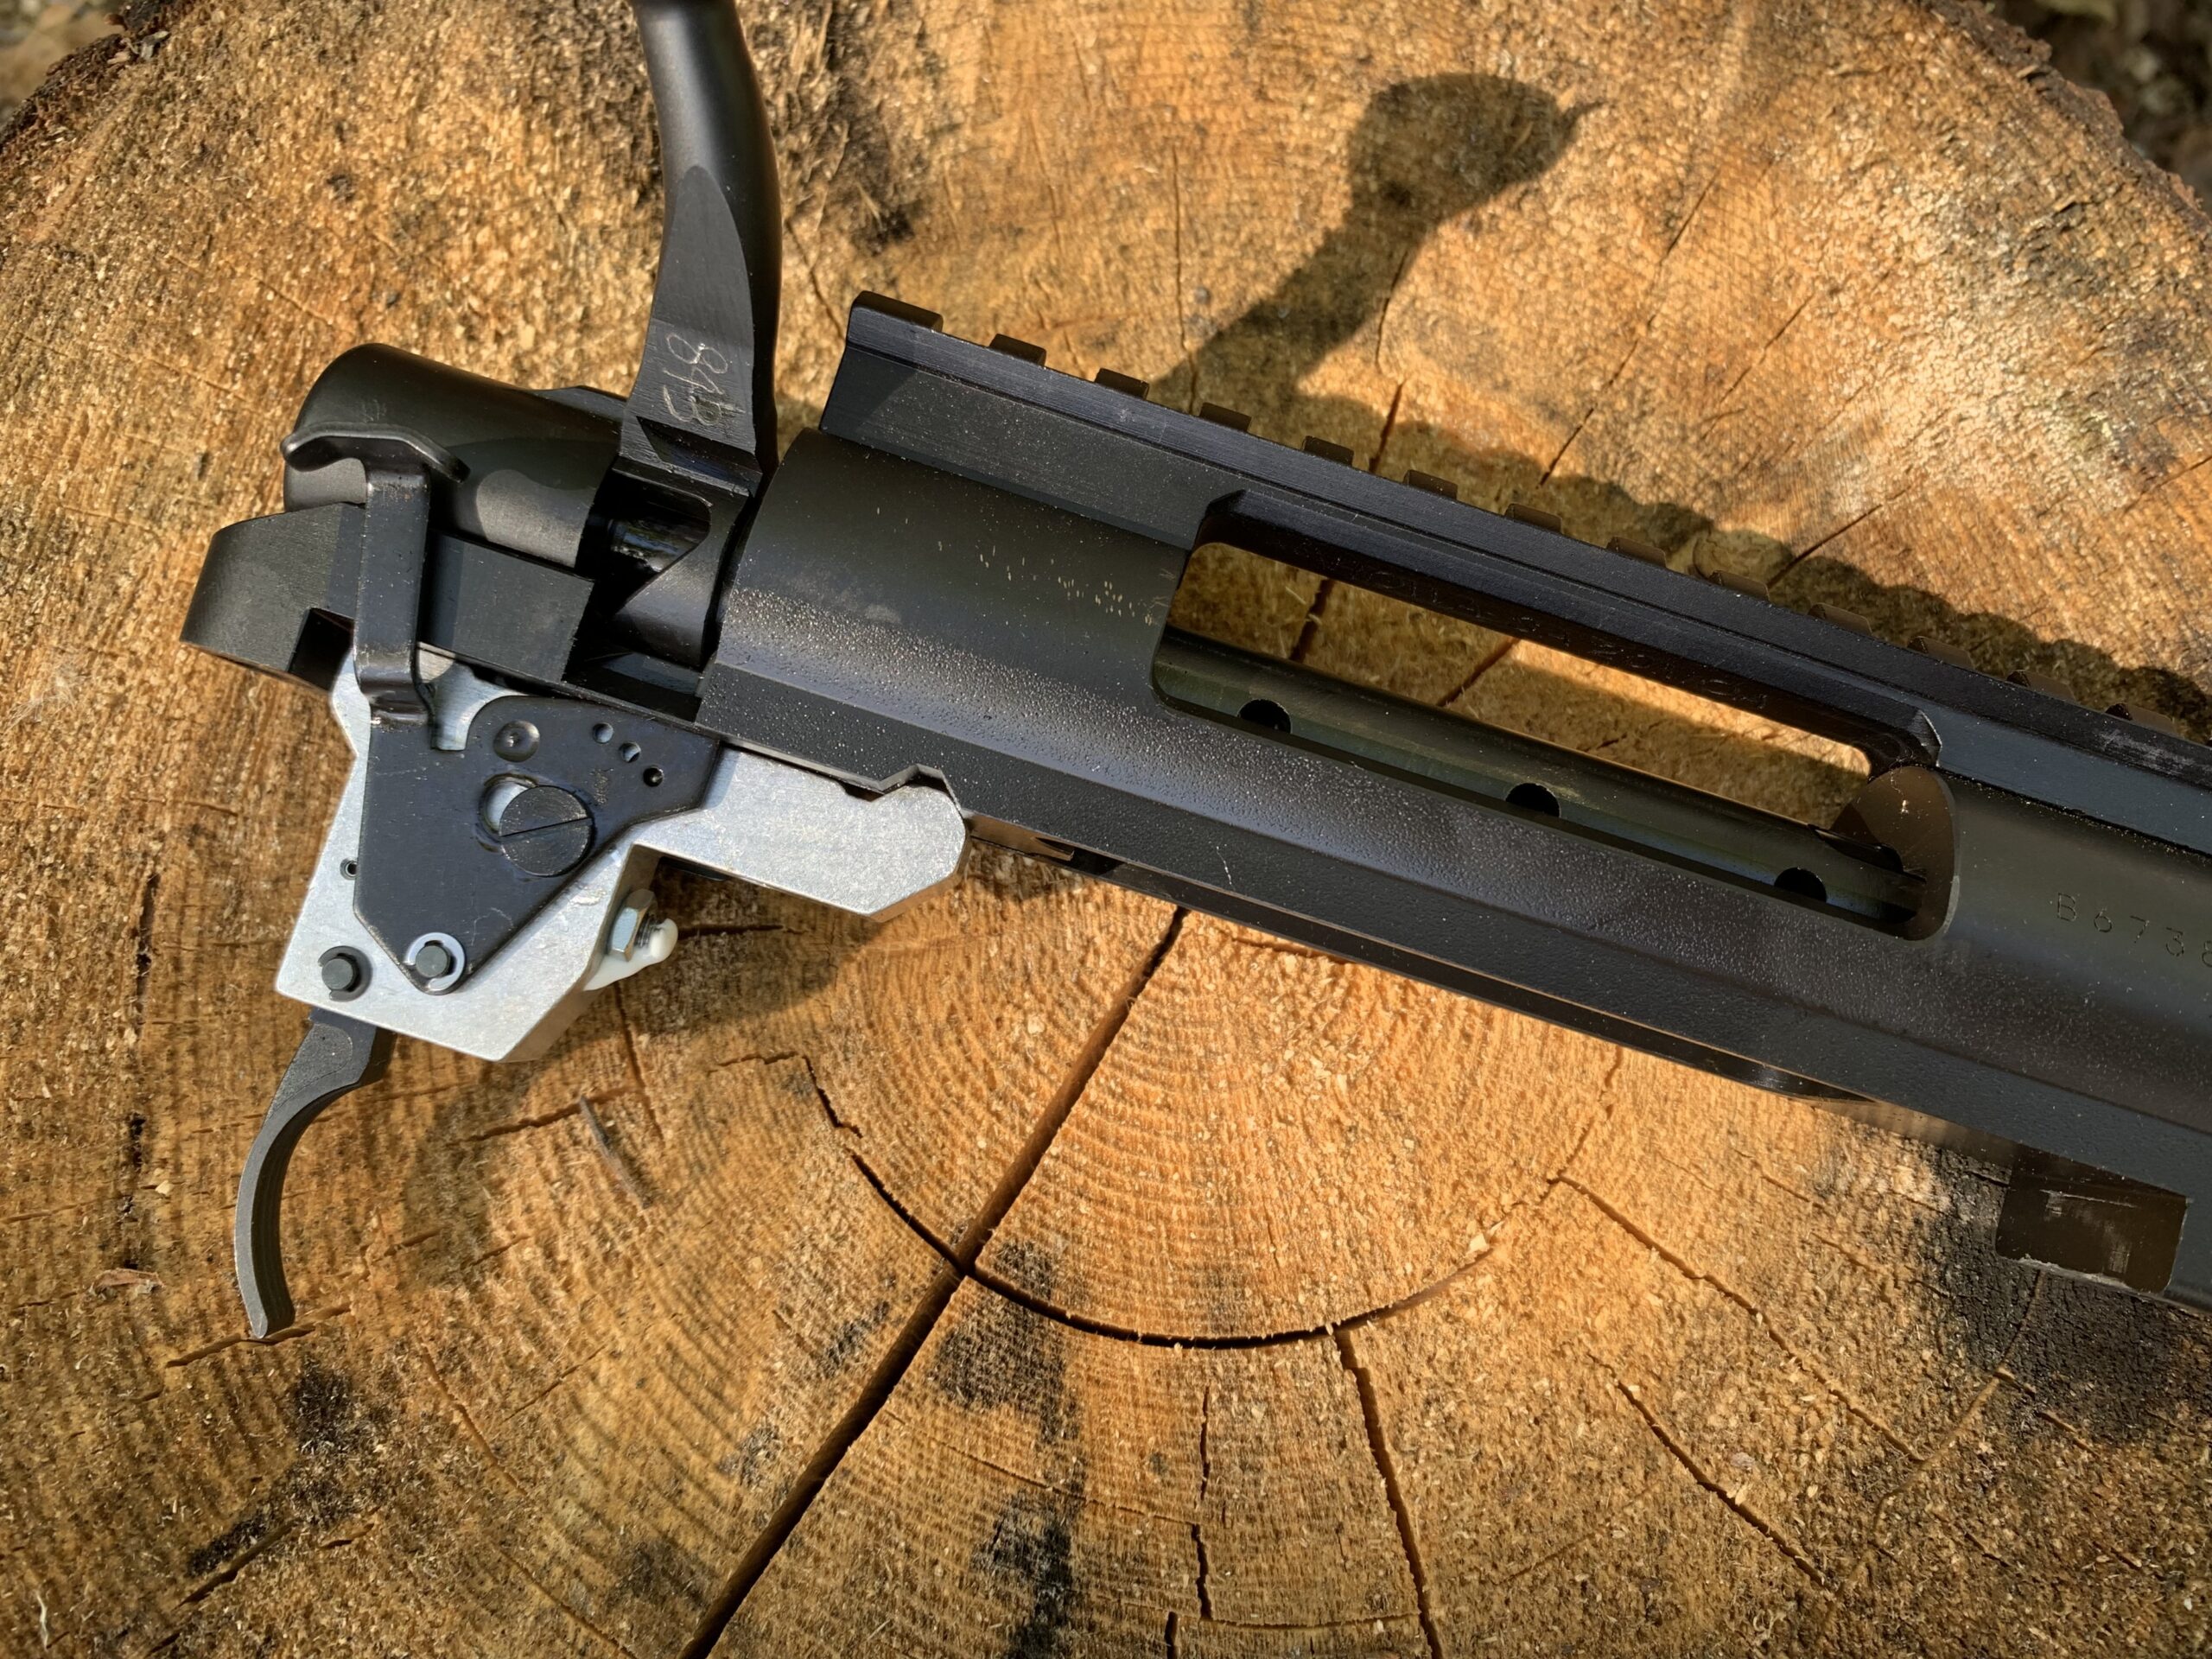 The two-stage HACT trigger on the Howa Model 1500